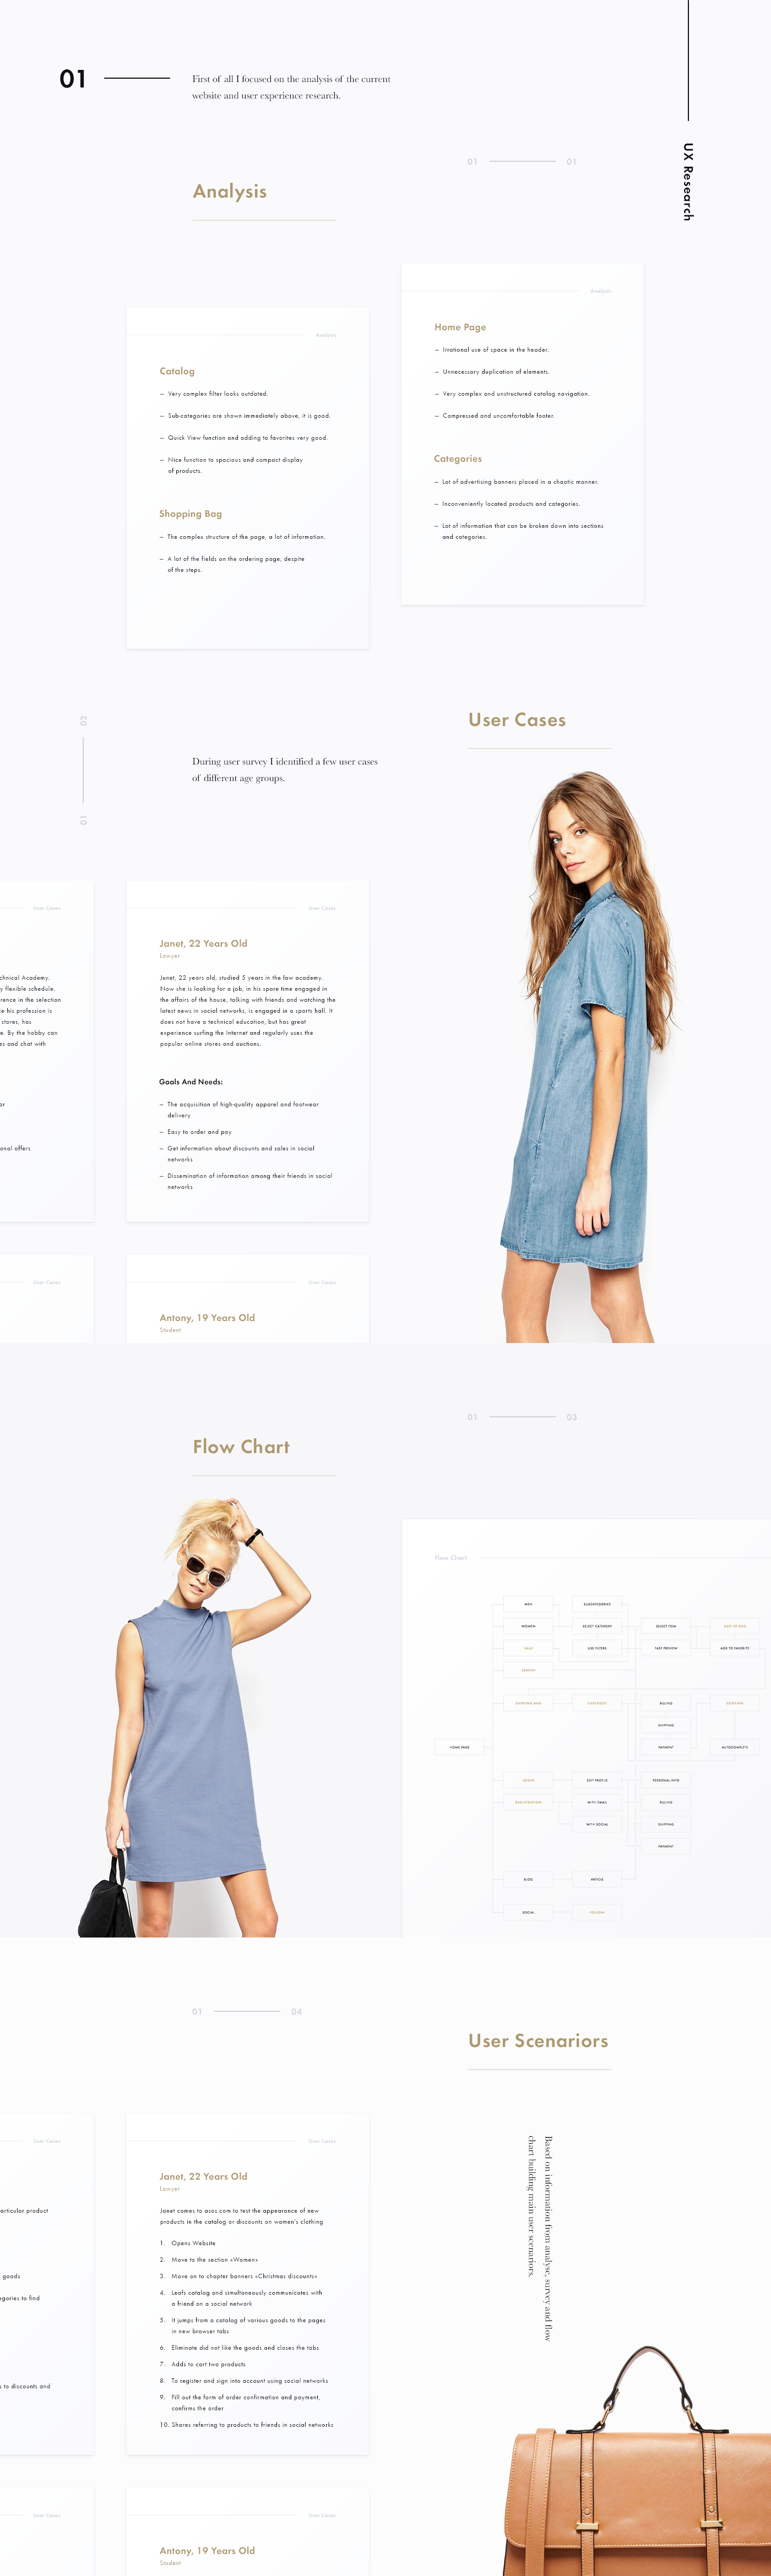 ux UX Research UX design UI ui design Fashion Store online store store mobile Responsive wireframe photo clean beauty clothes